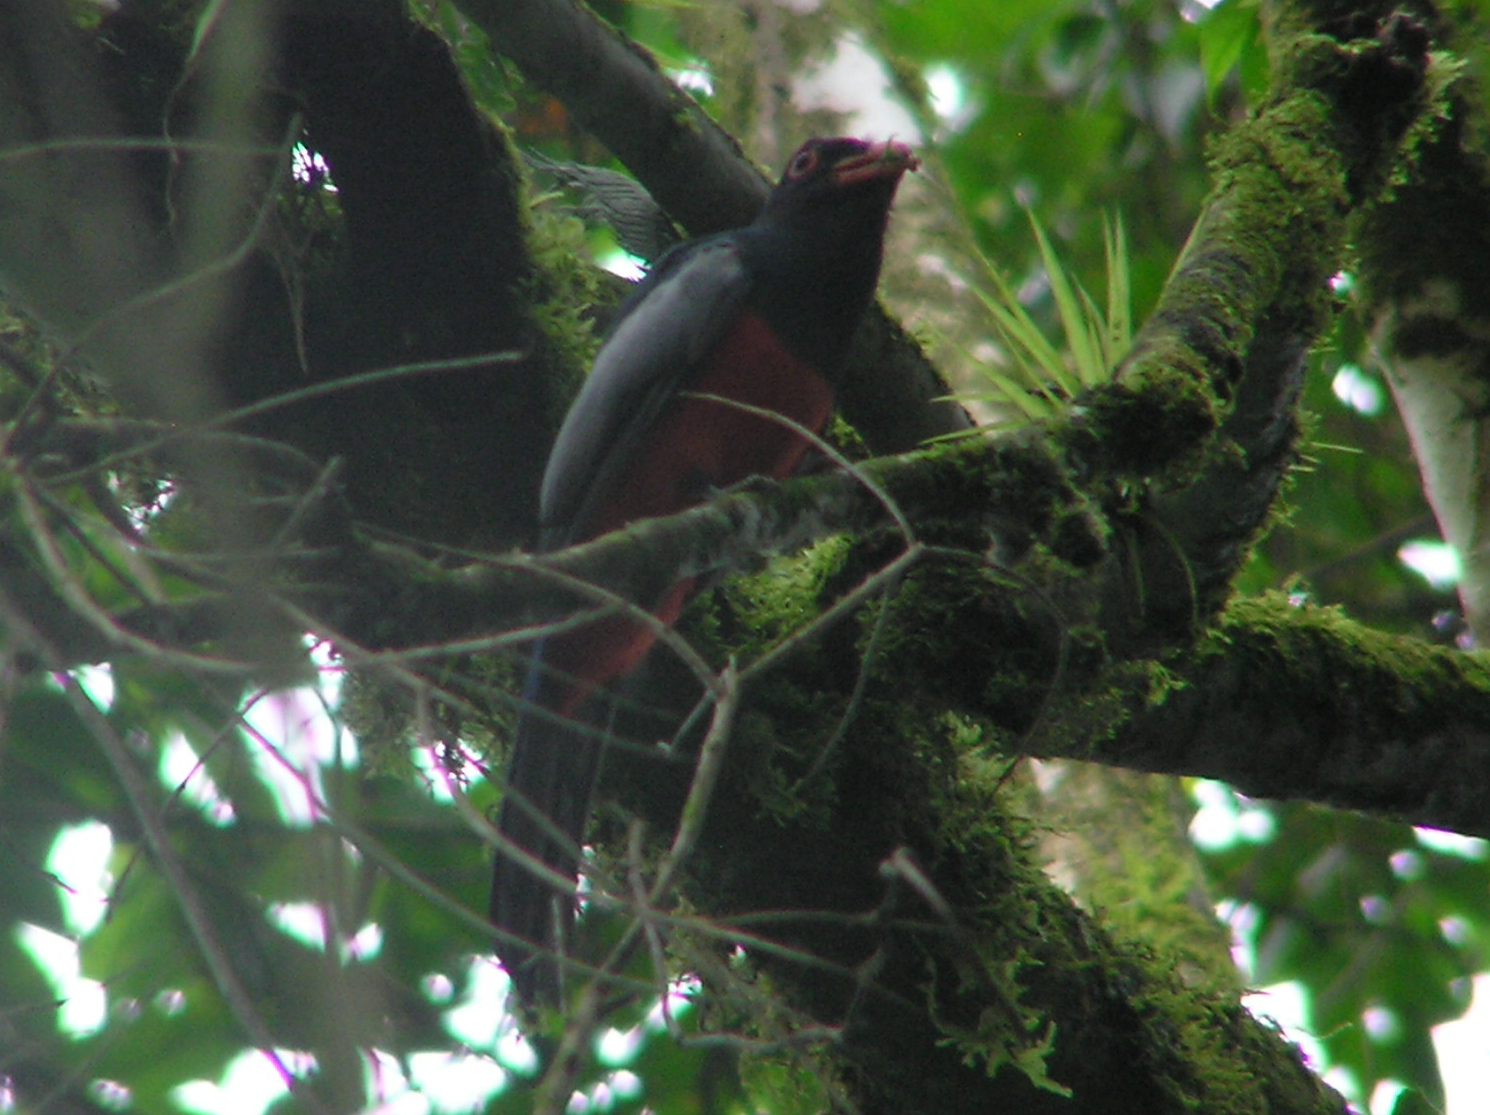 Click picture to see more Slaty-tailed Trogon photos.